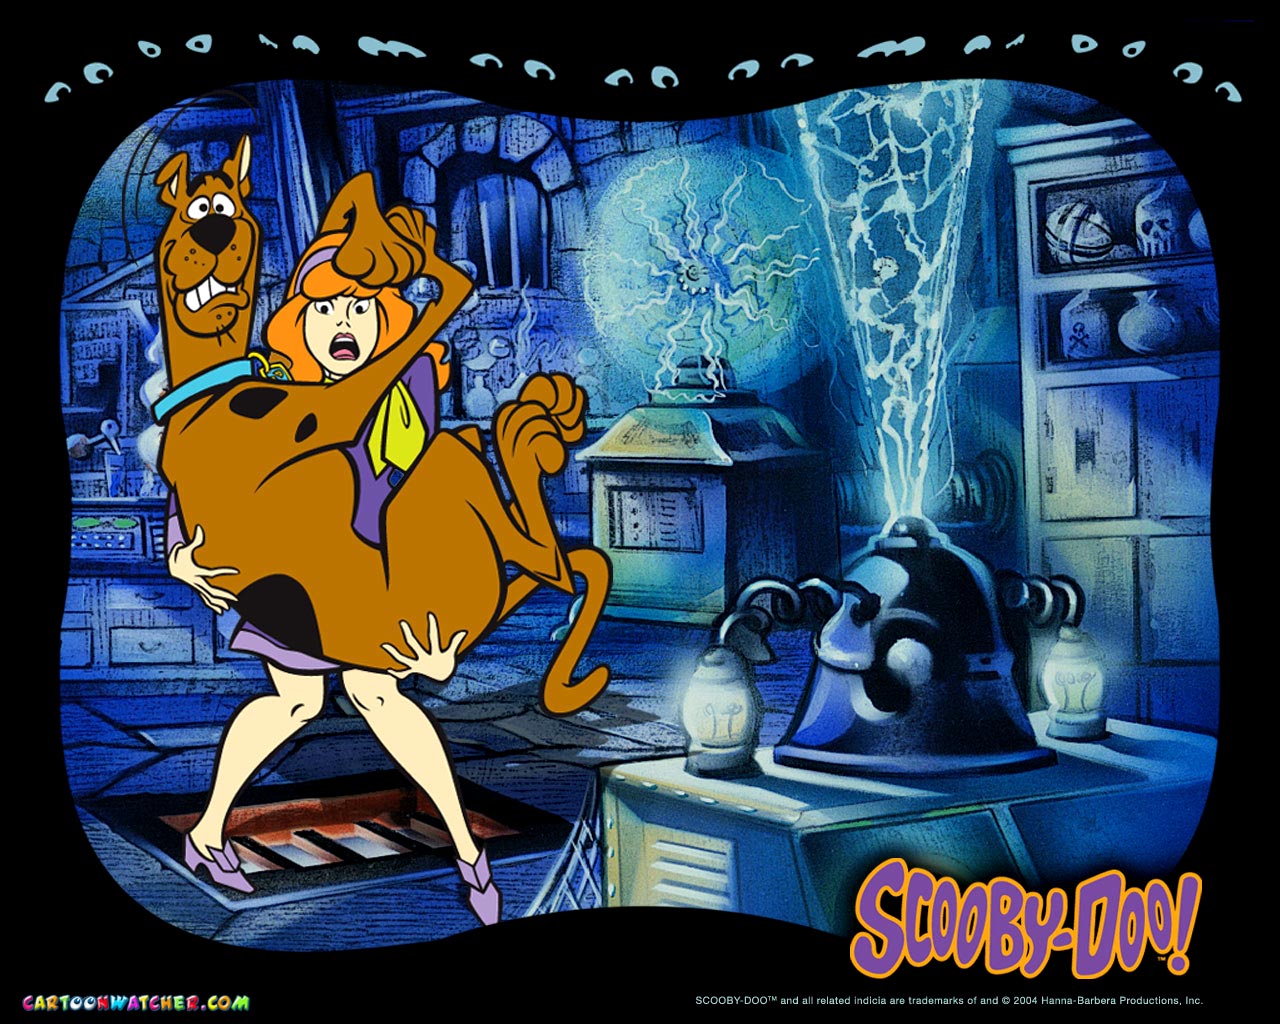 CBBC - Scooby-Doo and the Legend of the Vampire